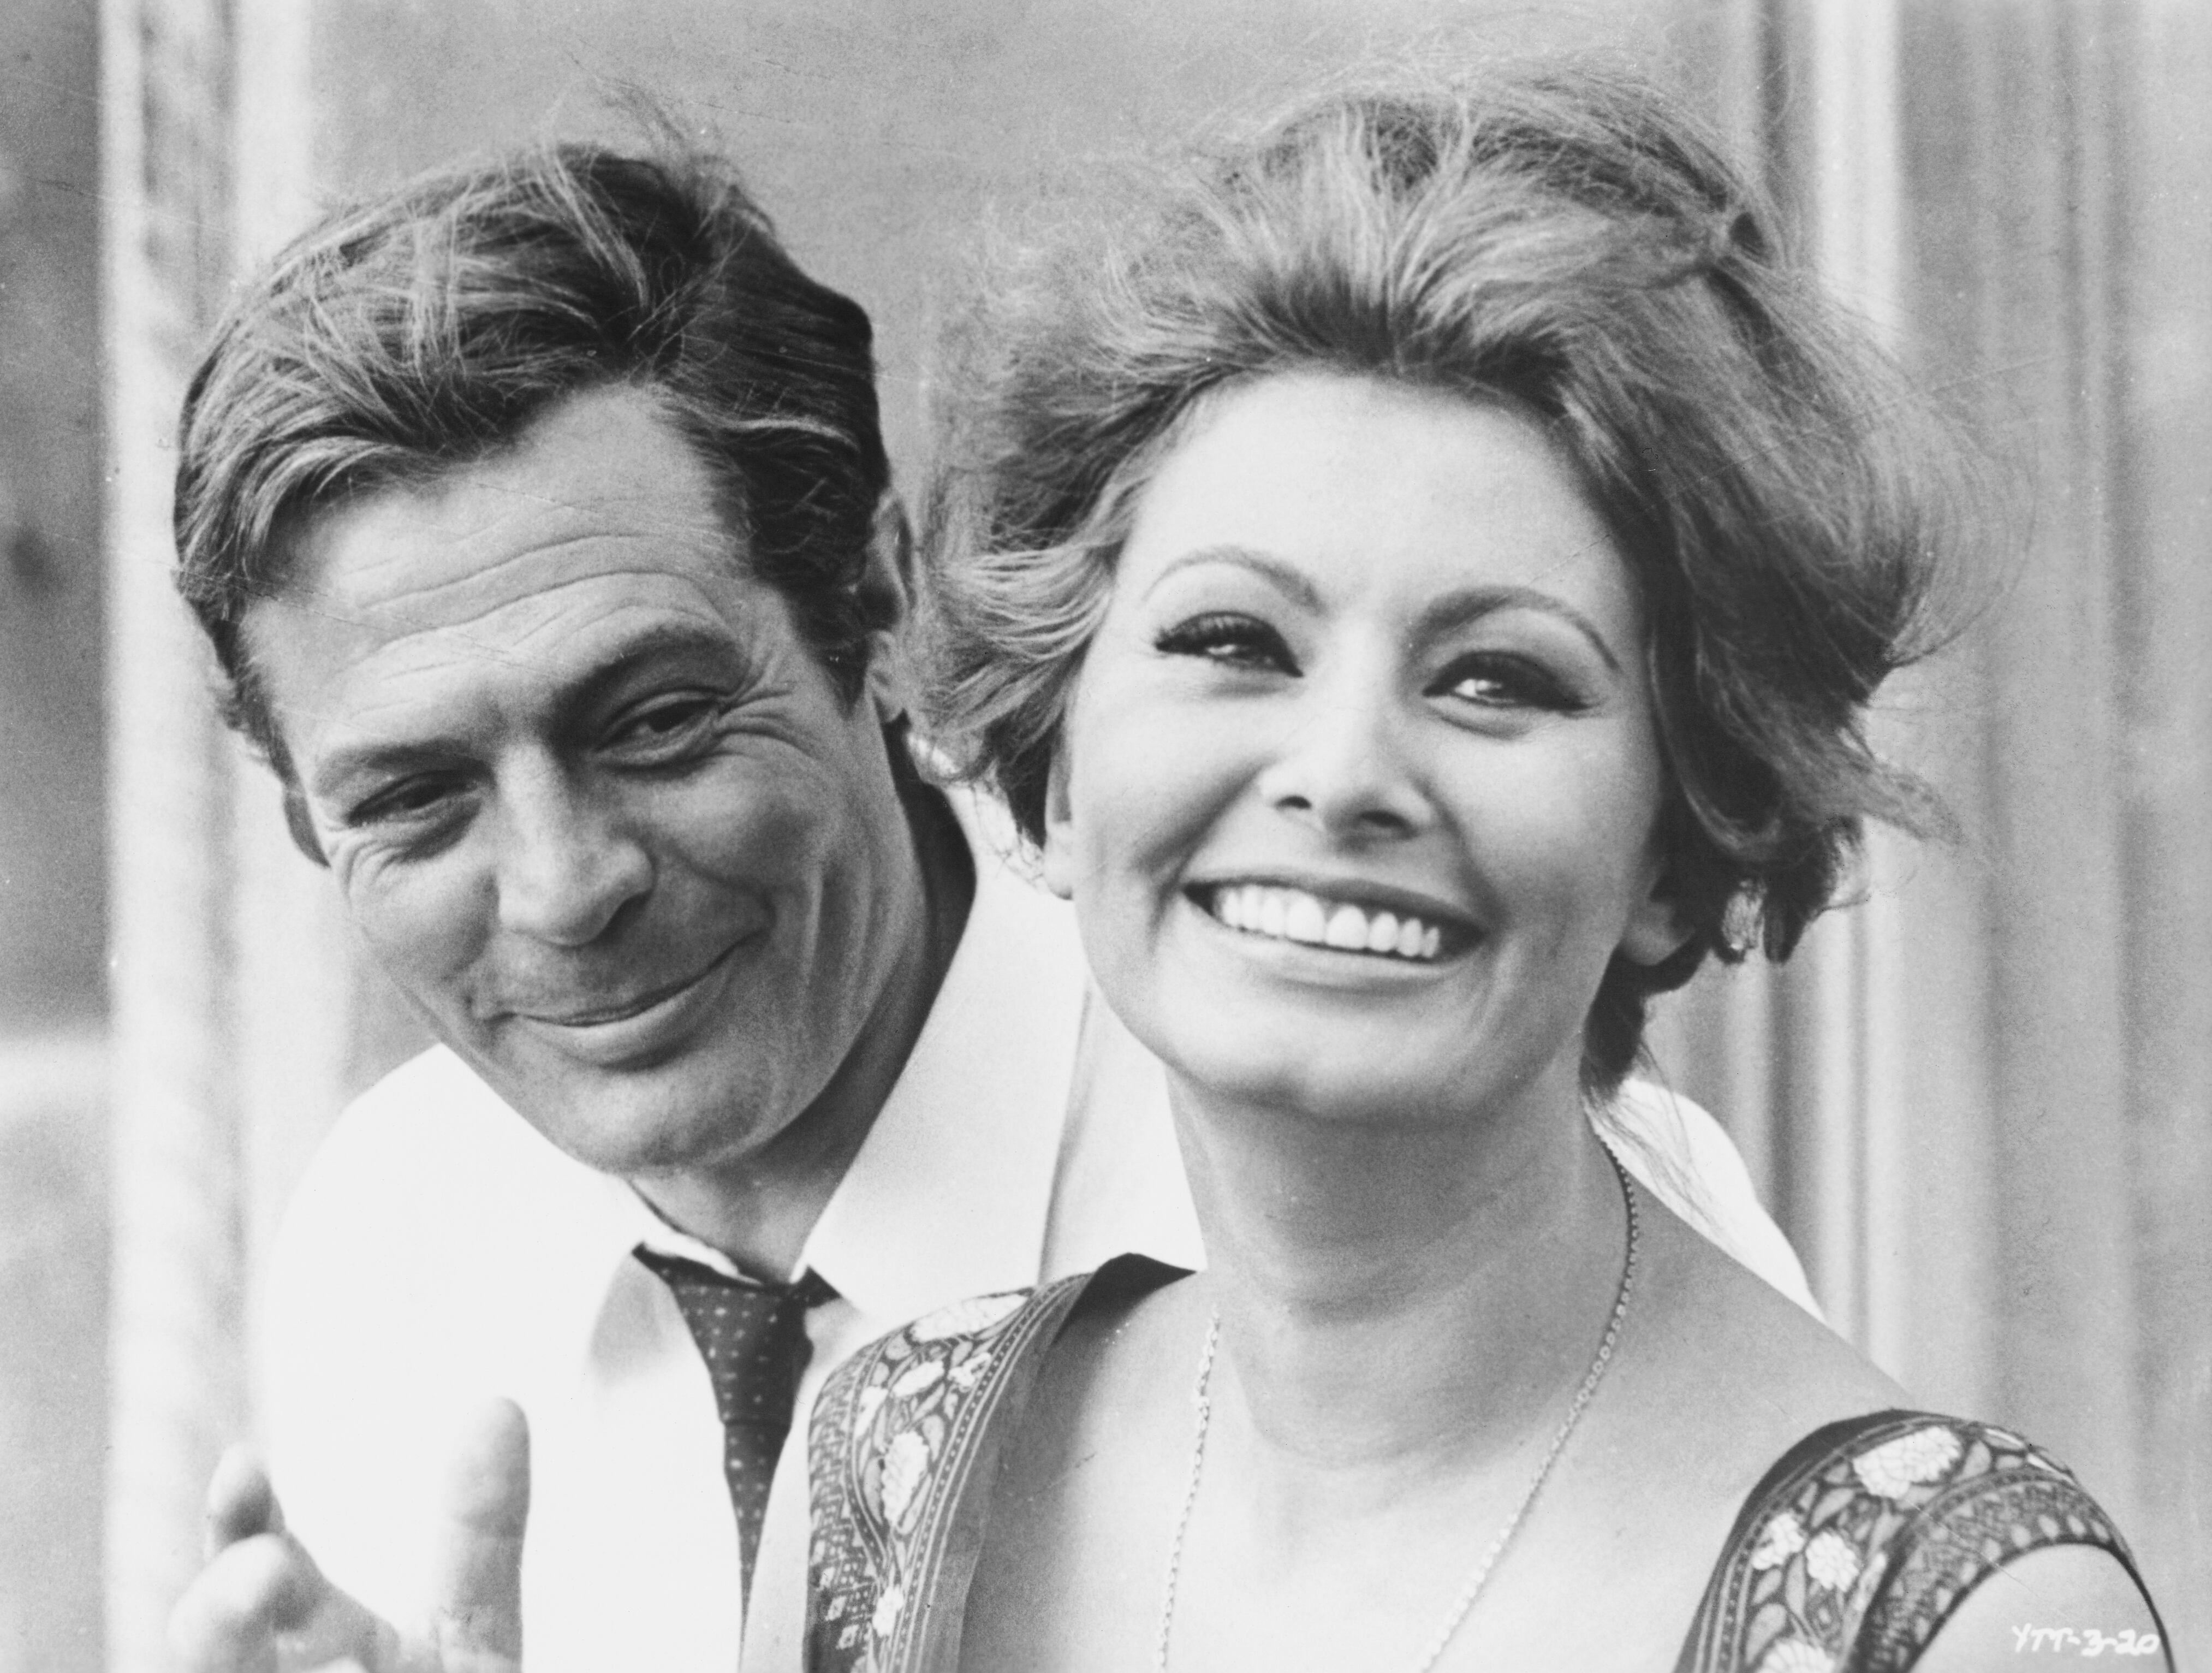 Marcello Mastroianni and Sophia Loren in 'Yesterday, Today and Tomorrow' (1964).